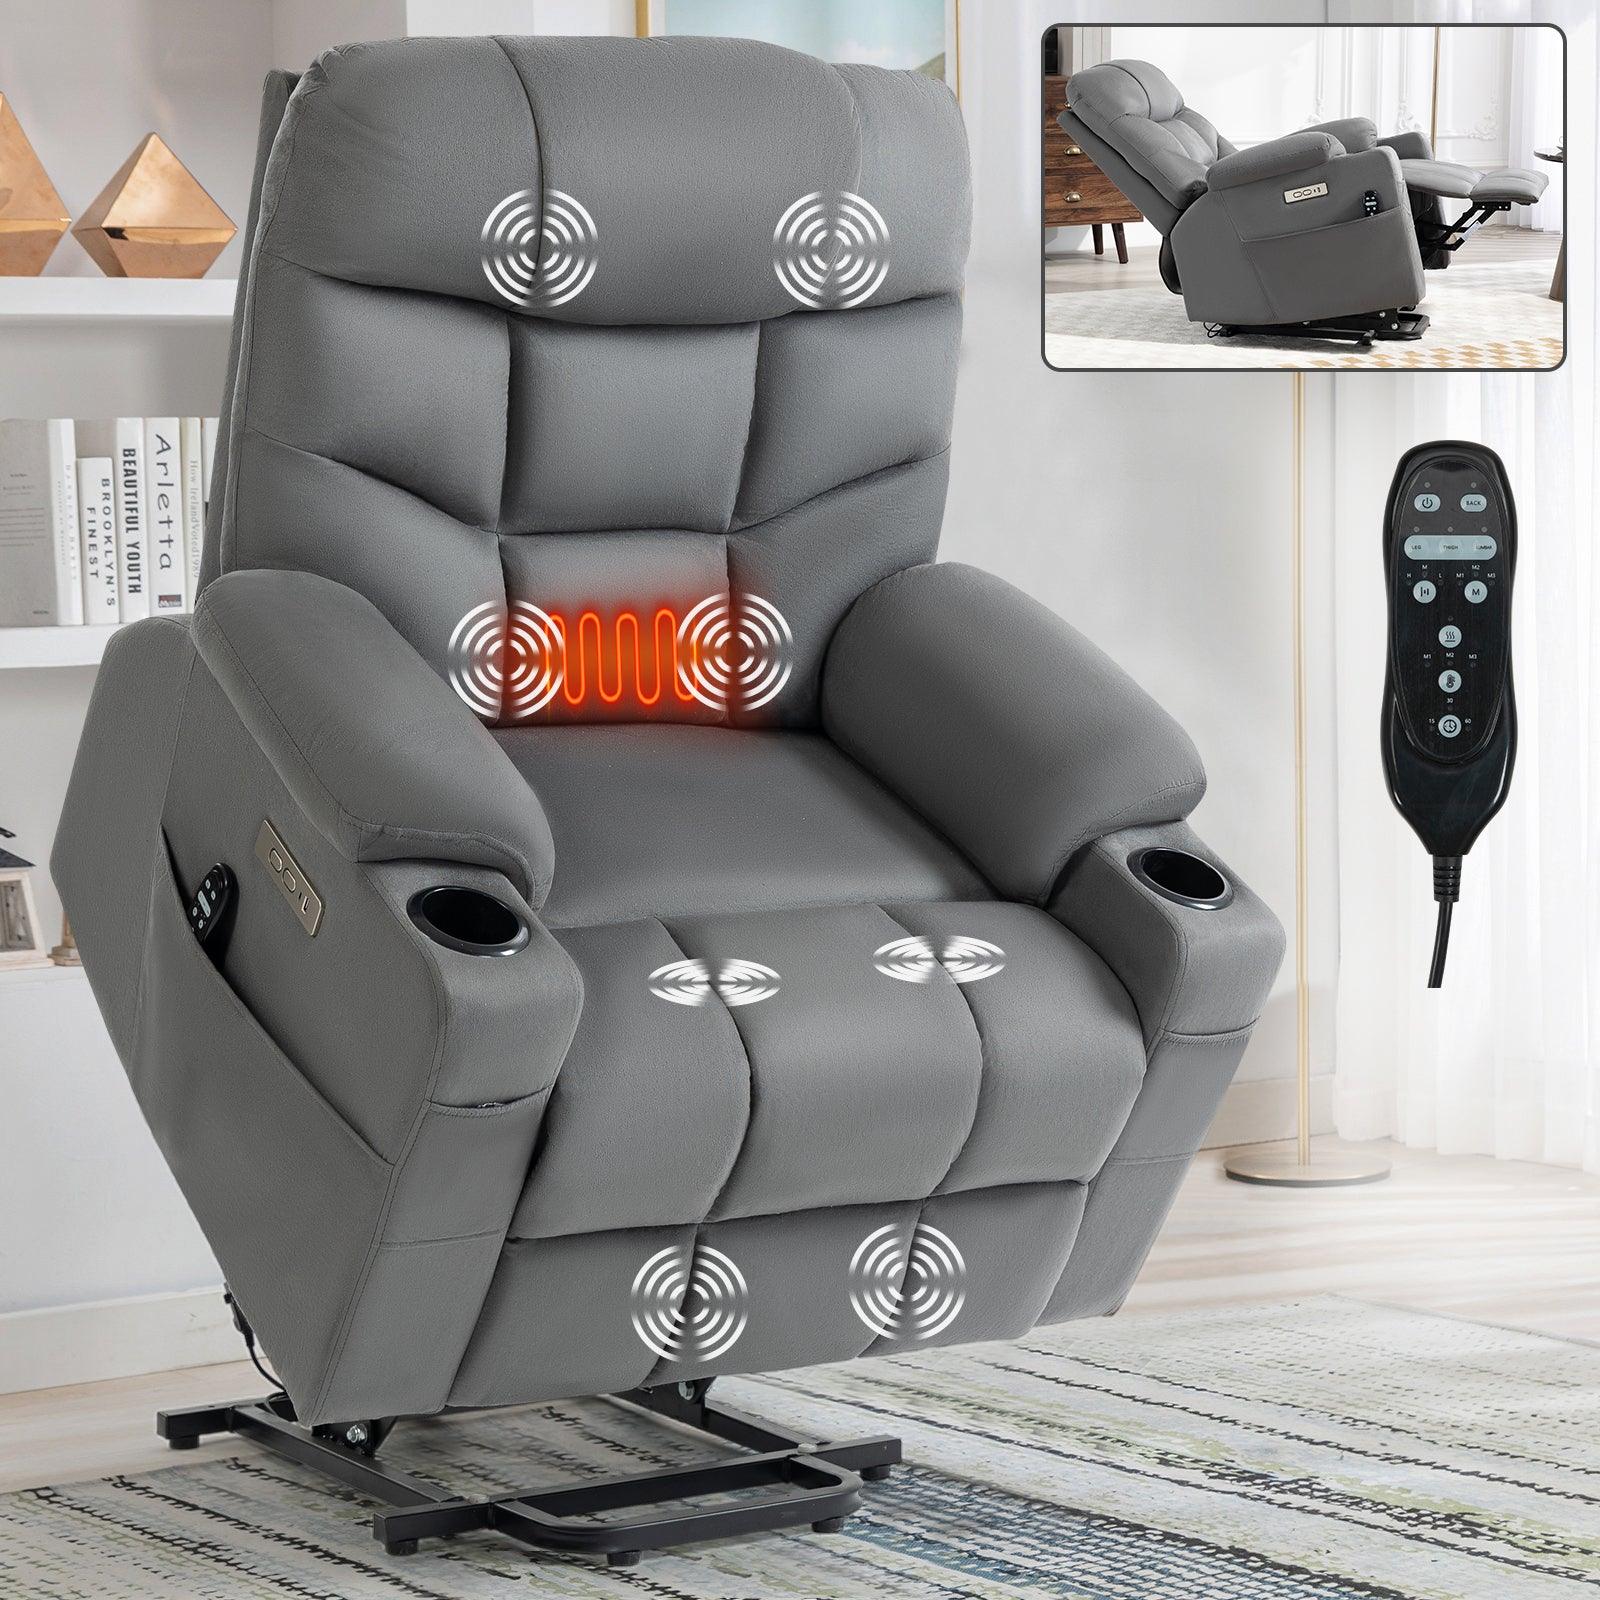 🆓🚛 Okin Motor Up To 350 Lbs Power Lift Recliner Chair, Heavy Duty Motion Mechanism With 8-Point Vibration Massage & Lumbar Heating, Cup Holders, Usb & Type-C Ports, Removable Cushions, Gray